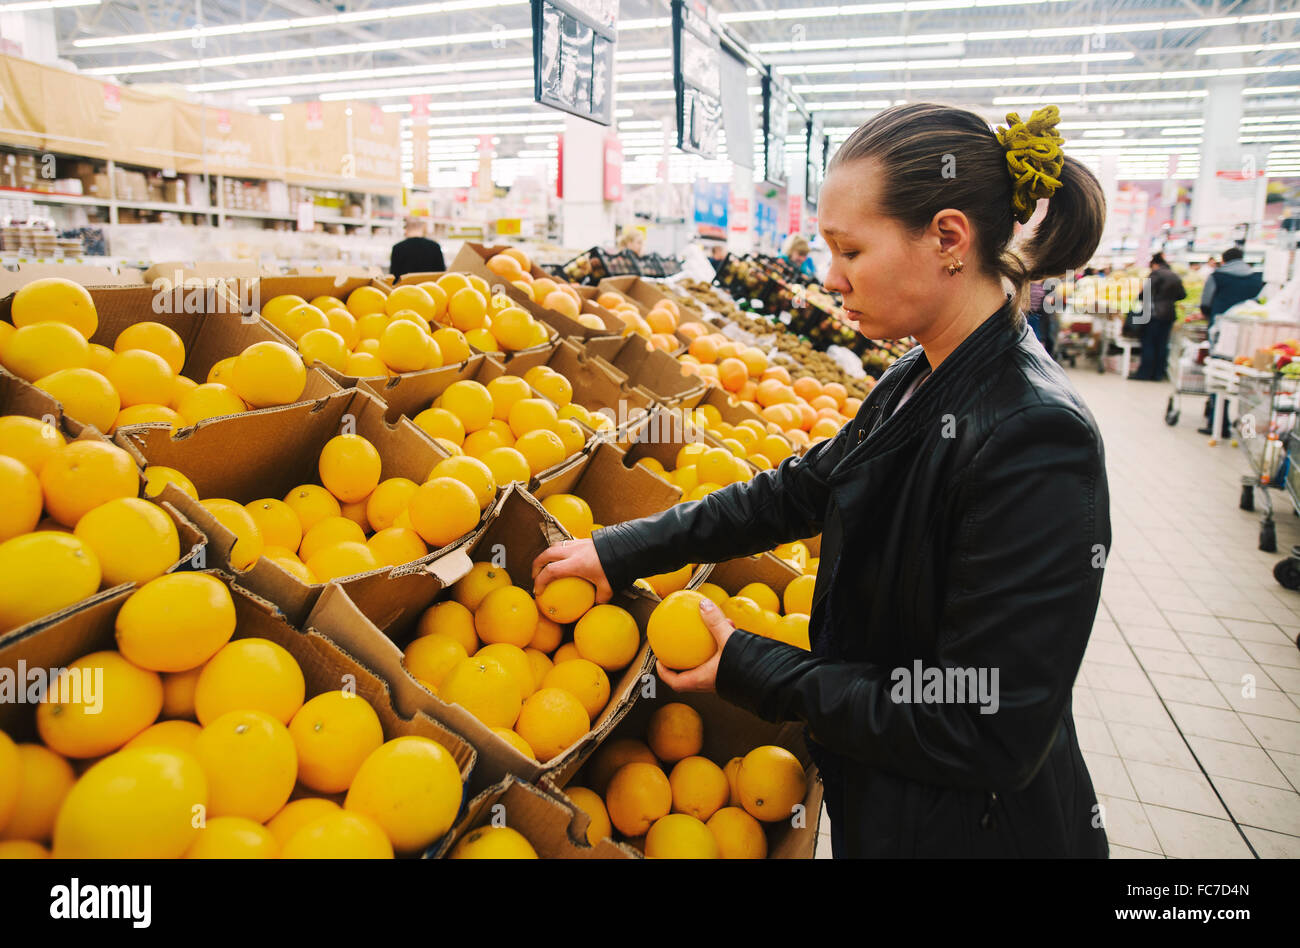 Caucasian woman shopping in grocery store Stock Photo